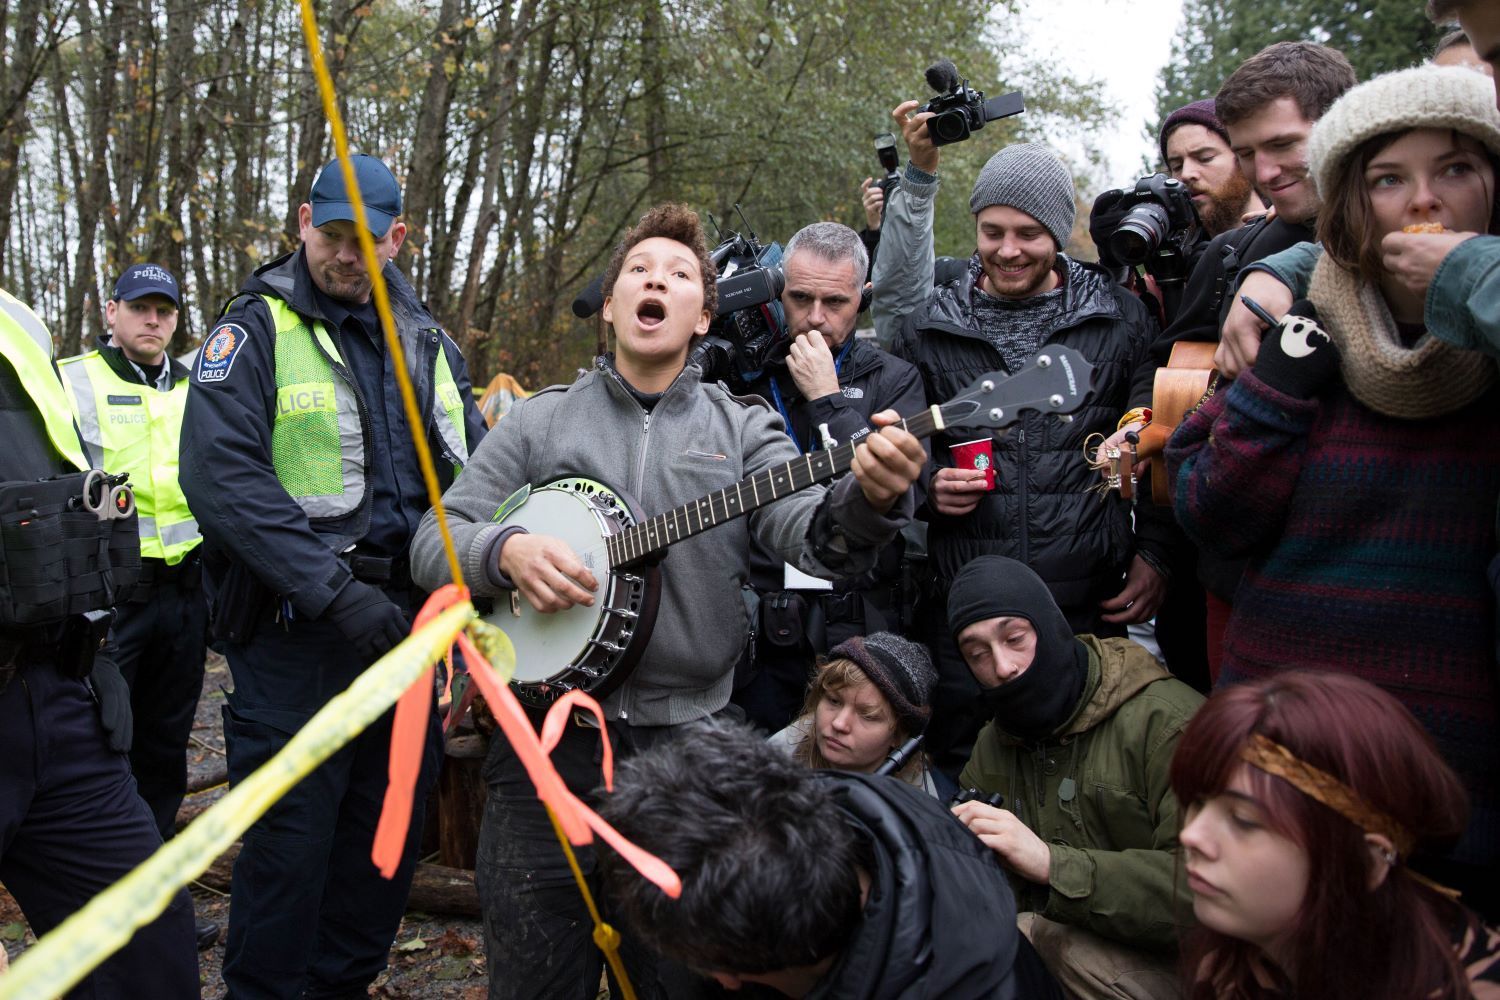 A mixed group of police officers, young people and photographers at a protest site. In the centre is a young person playing a banjo and singing.